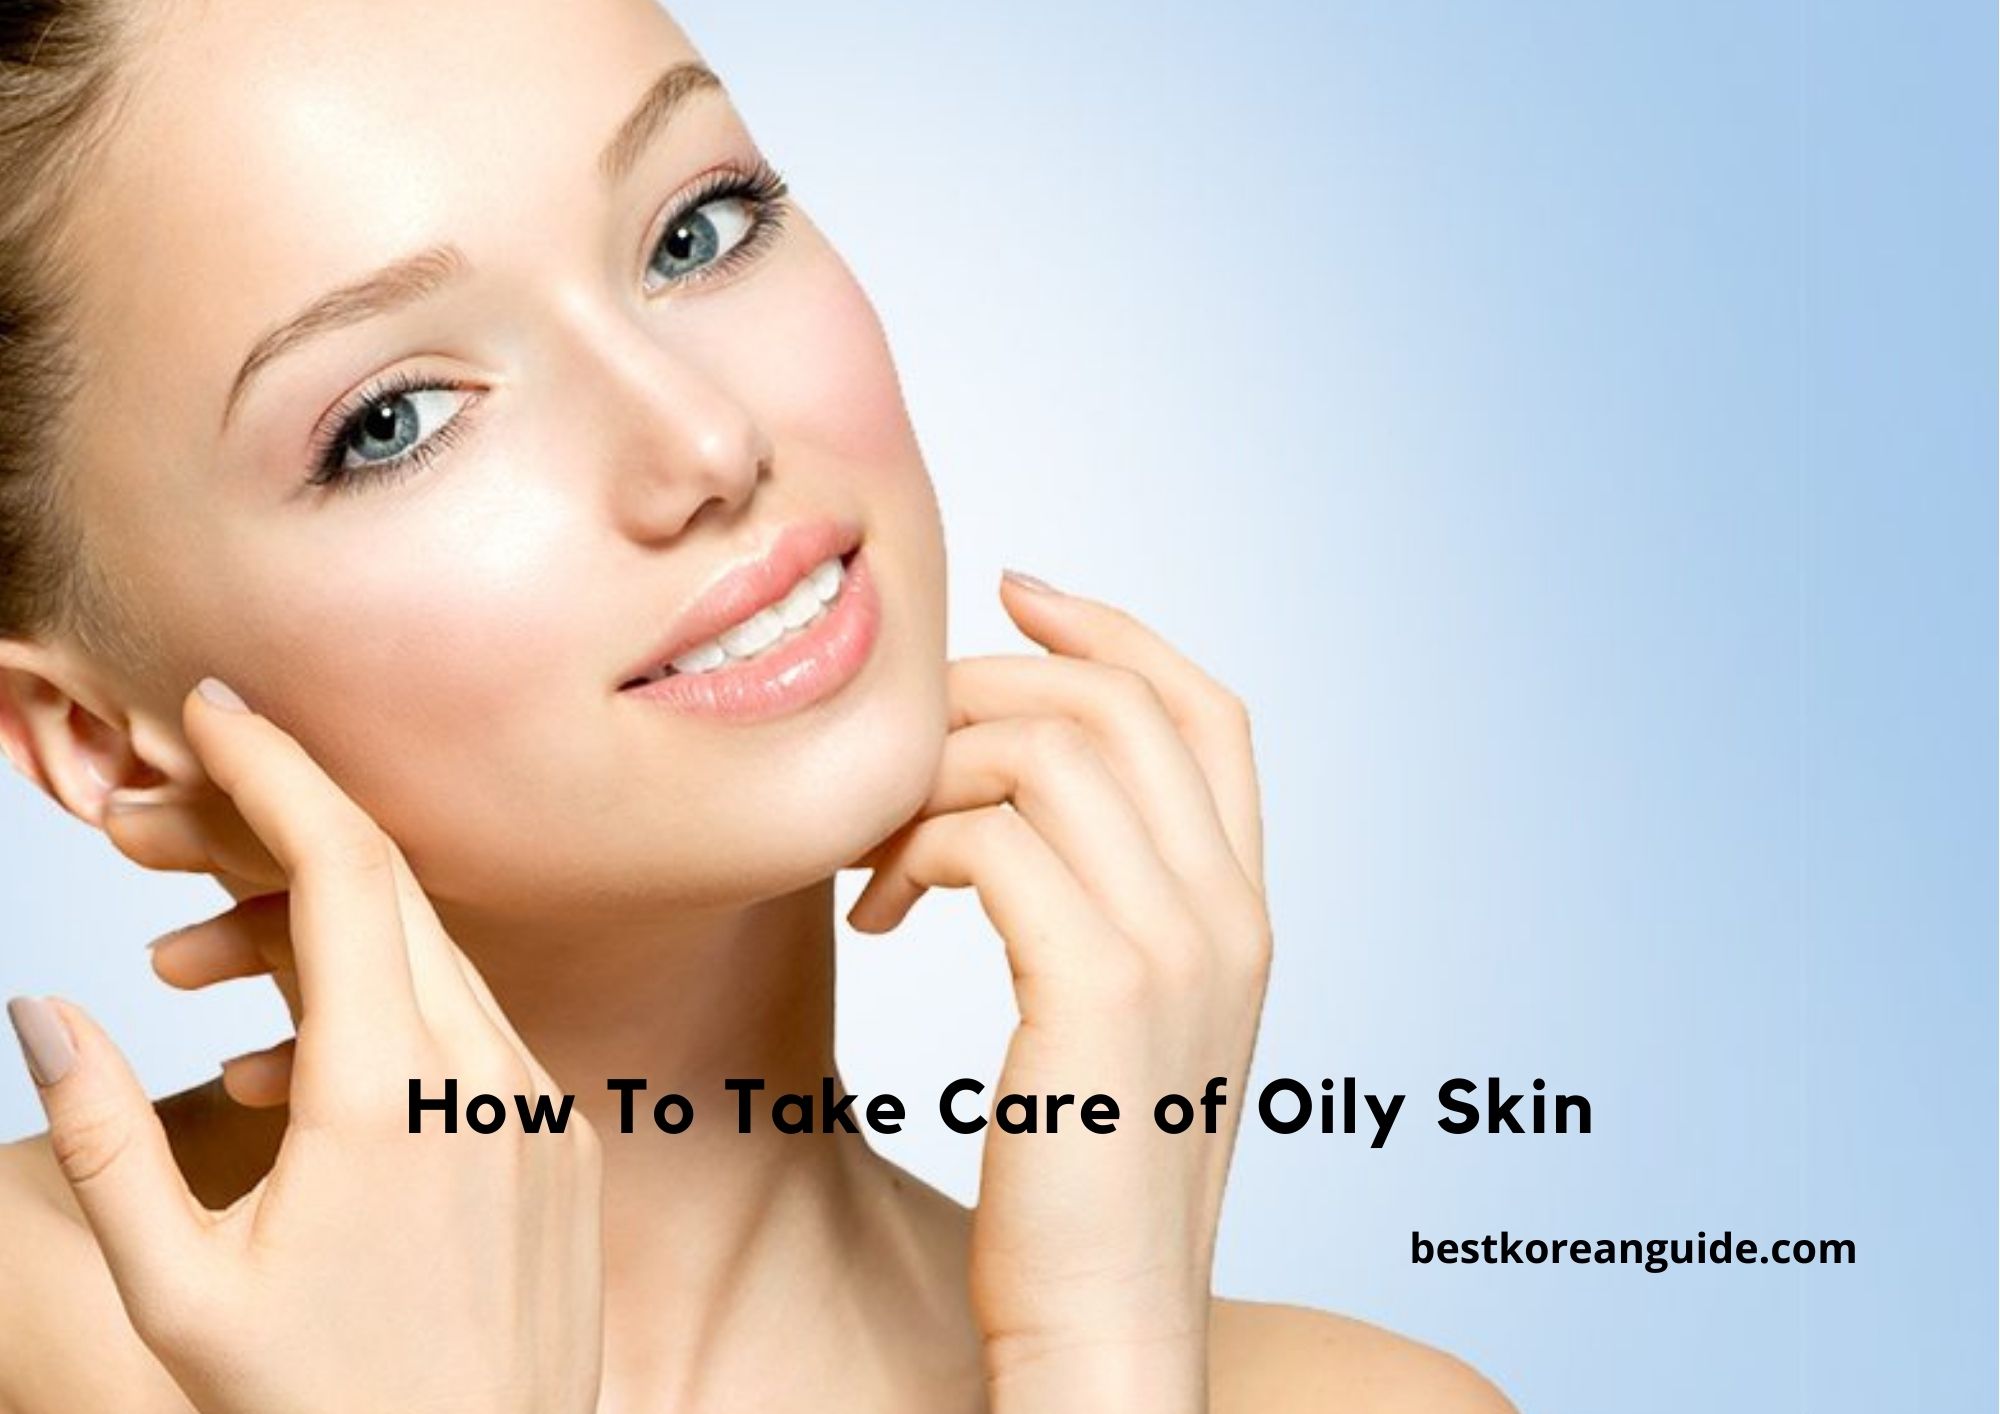 How to Take Care of Oily Skin